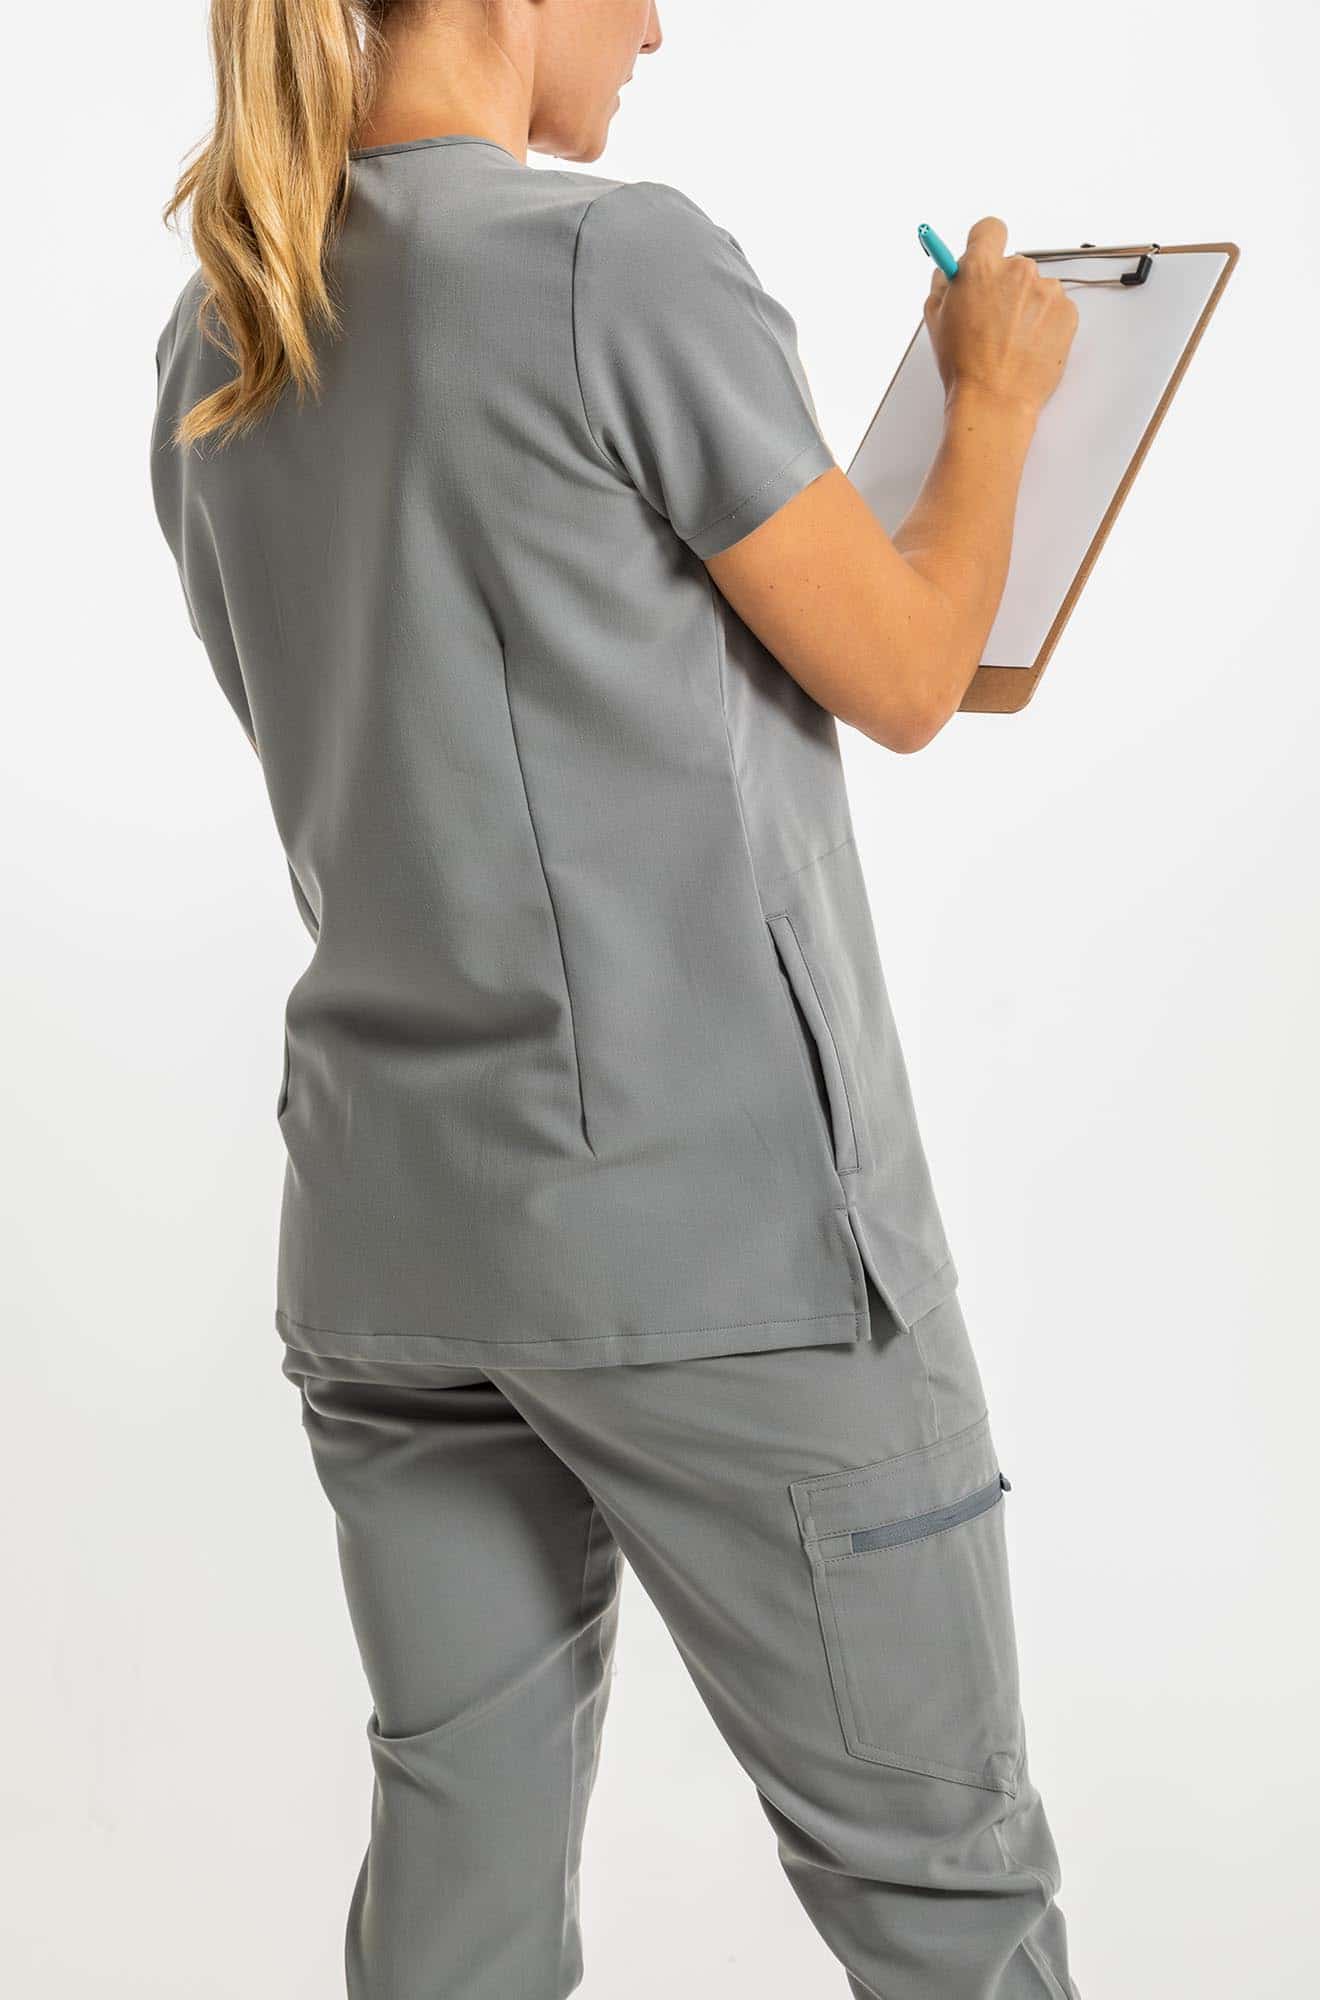 VENA ladies jogger style scrub shirt lady with checklist and pen in her hand#colour_grey